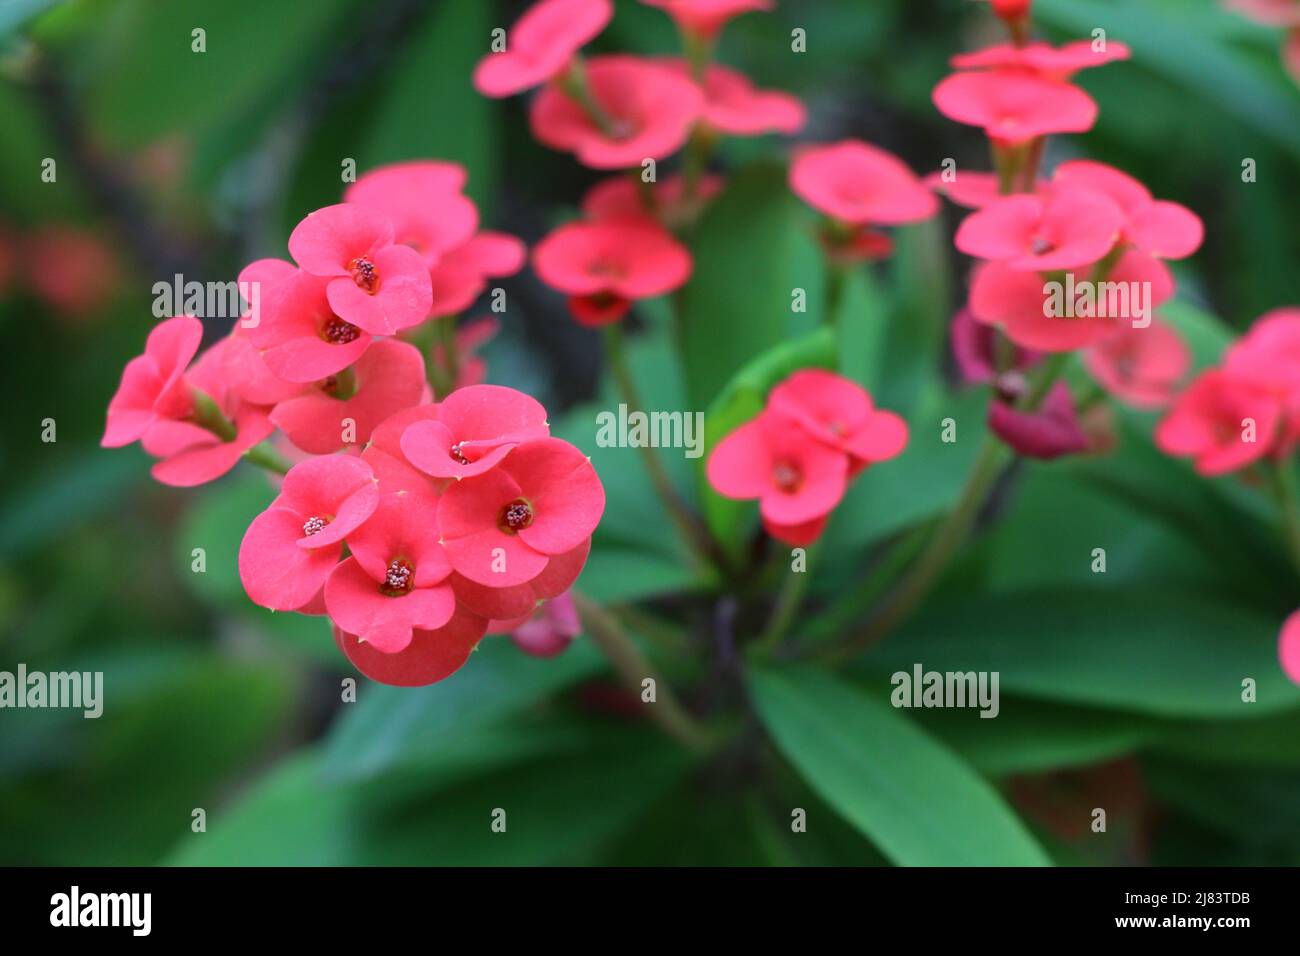 Blooming plant Euphorbia milii or Crown of Thorns Stock Photo